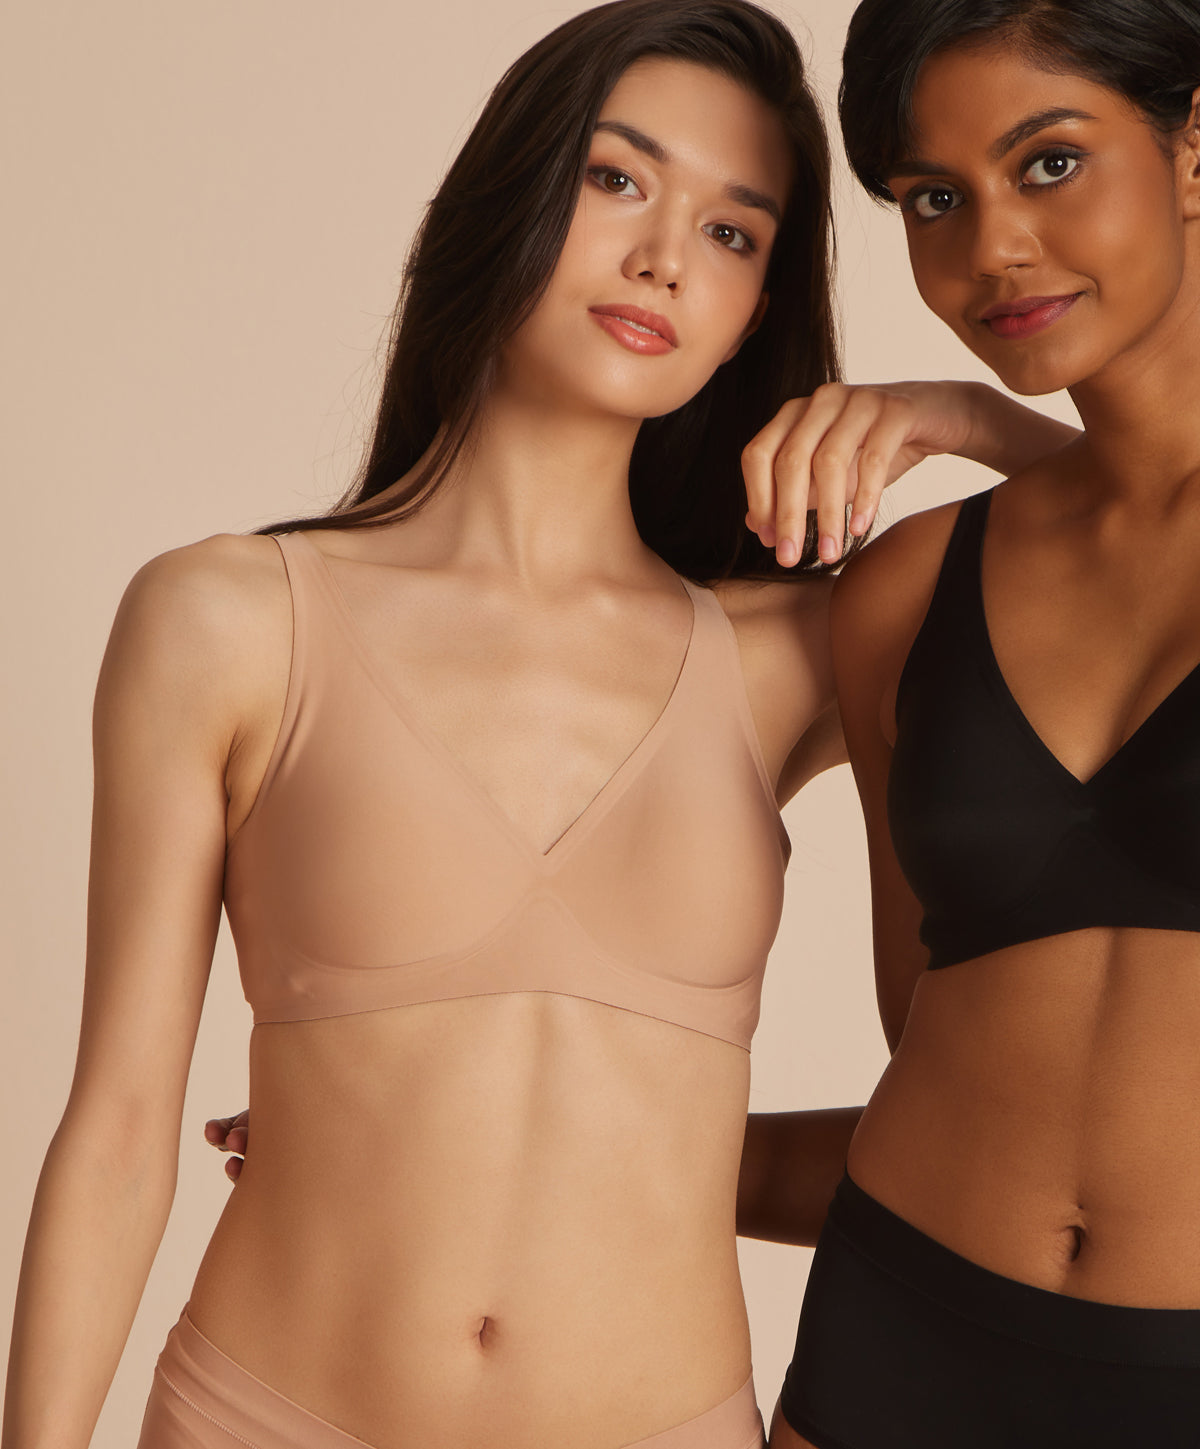 Bralette: Indefinite Looks To Upgrade With The Garment - Glaminati